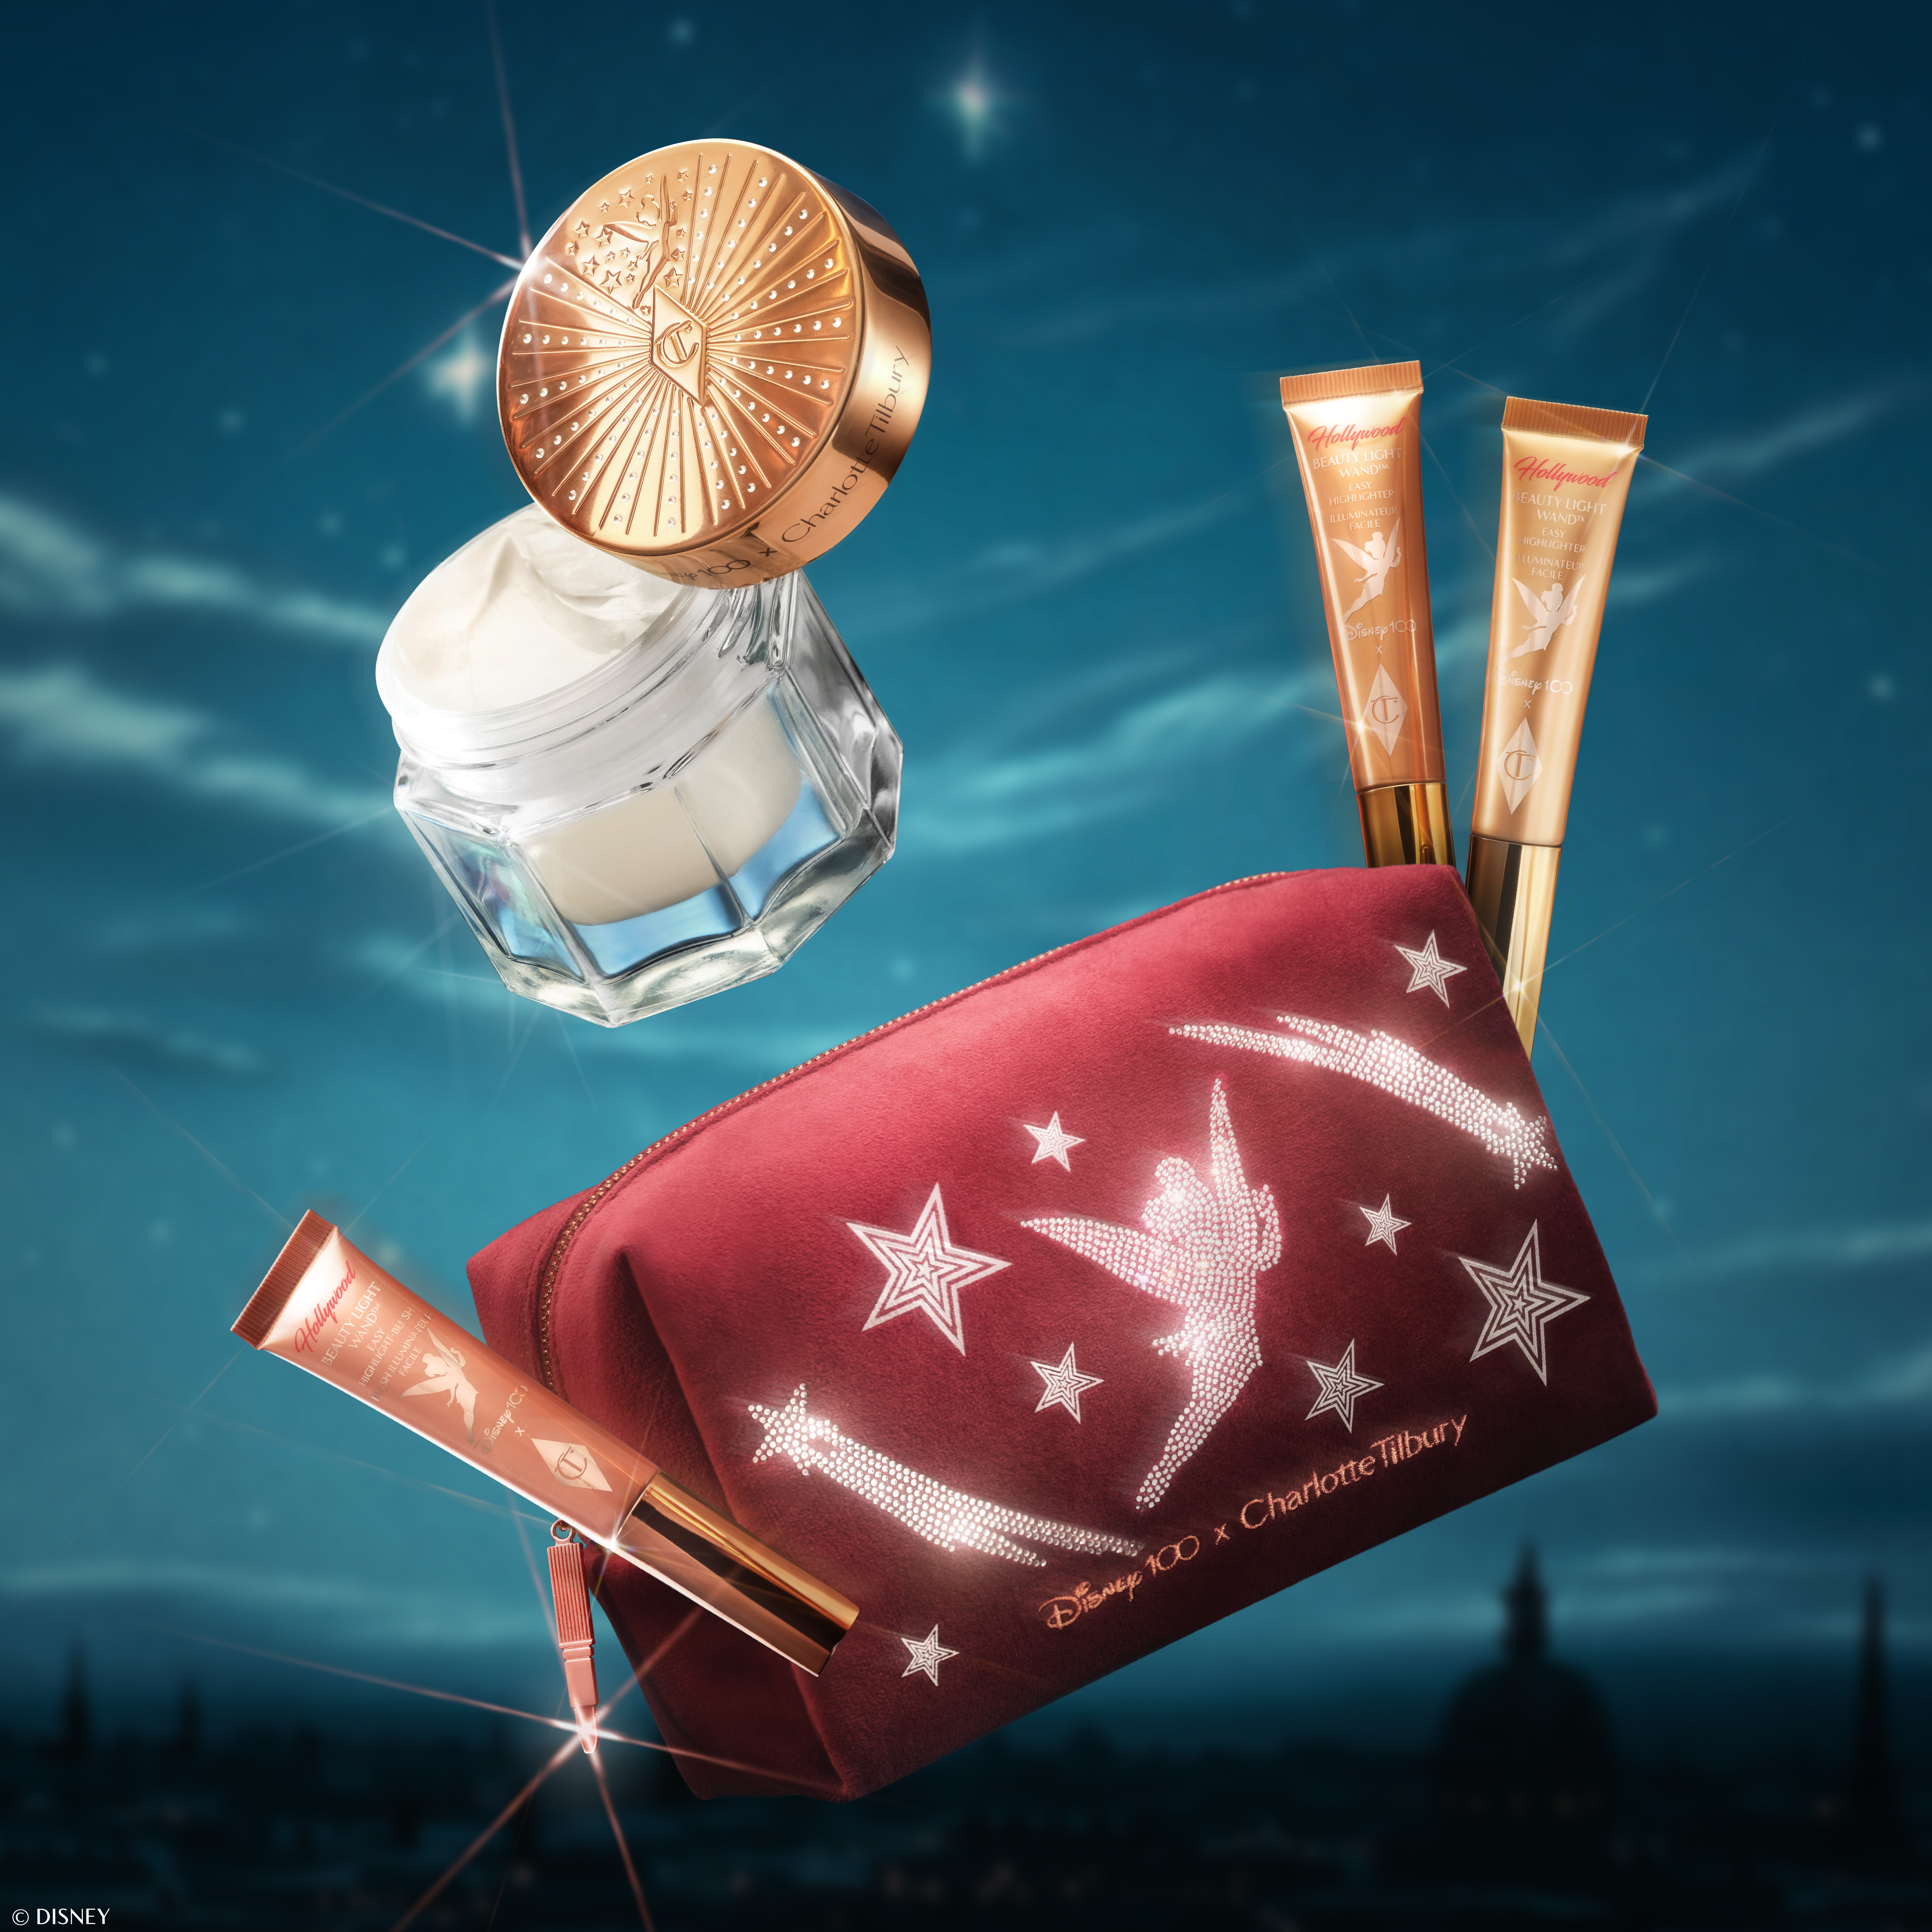 Disney 100 x Charlotte Tilbury limited-edition beauty products on a night sky backdrop